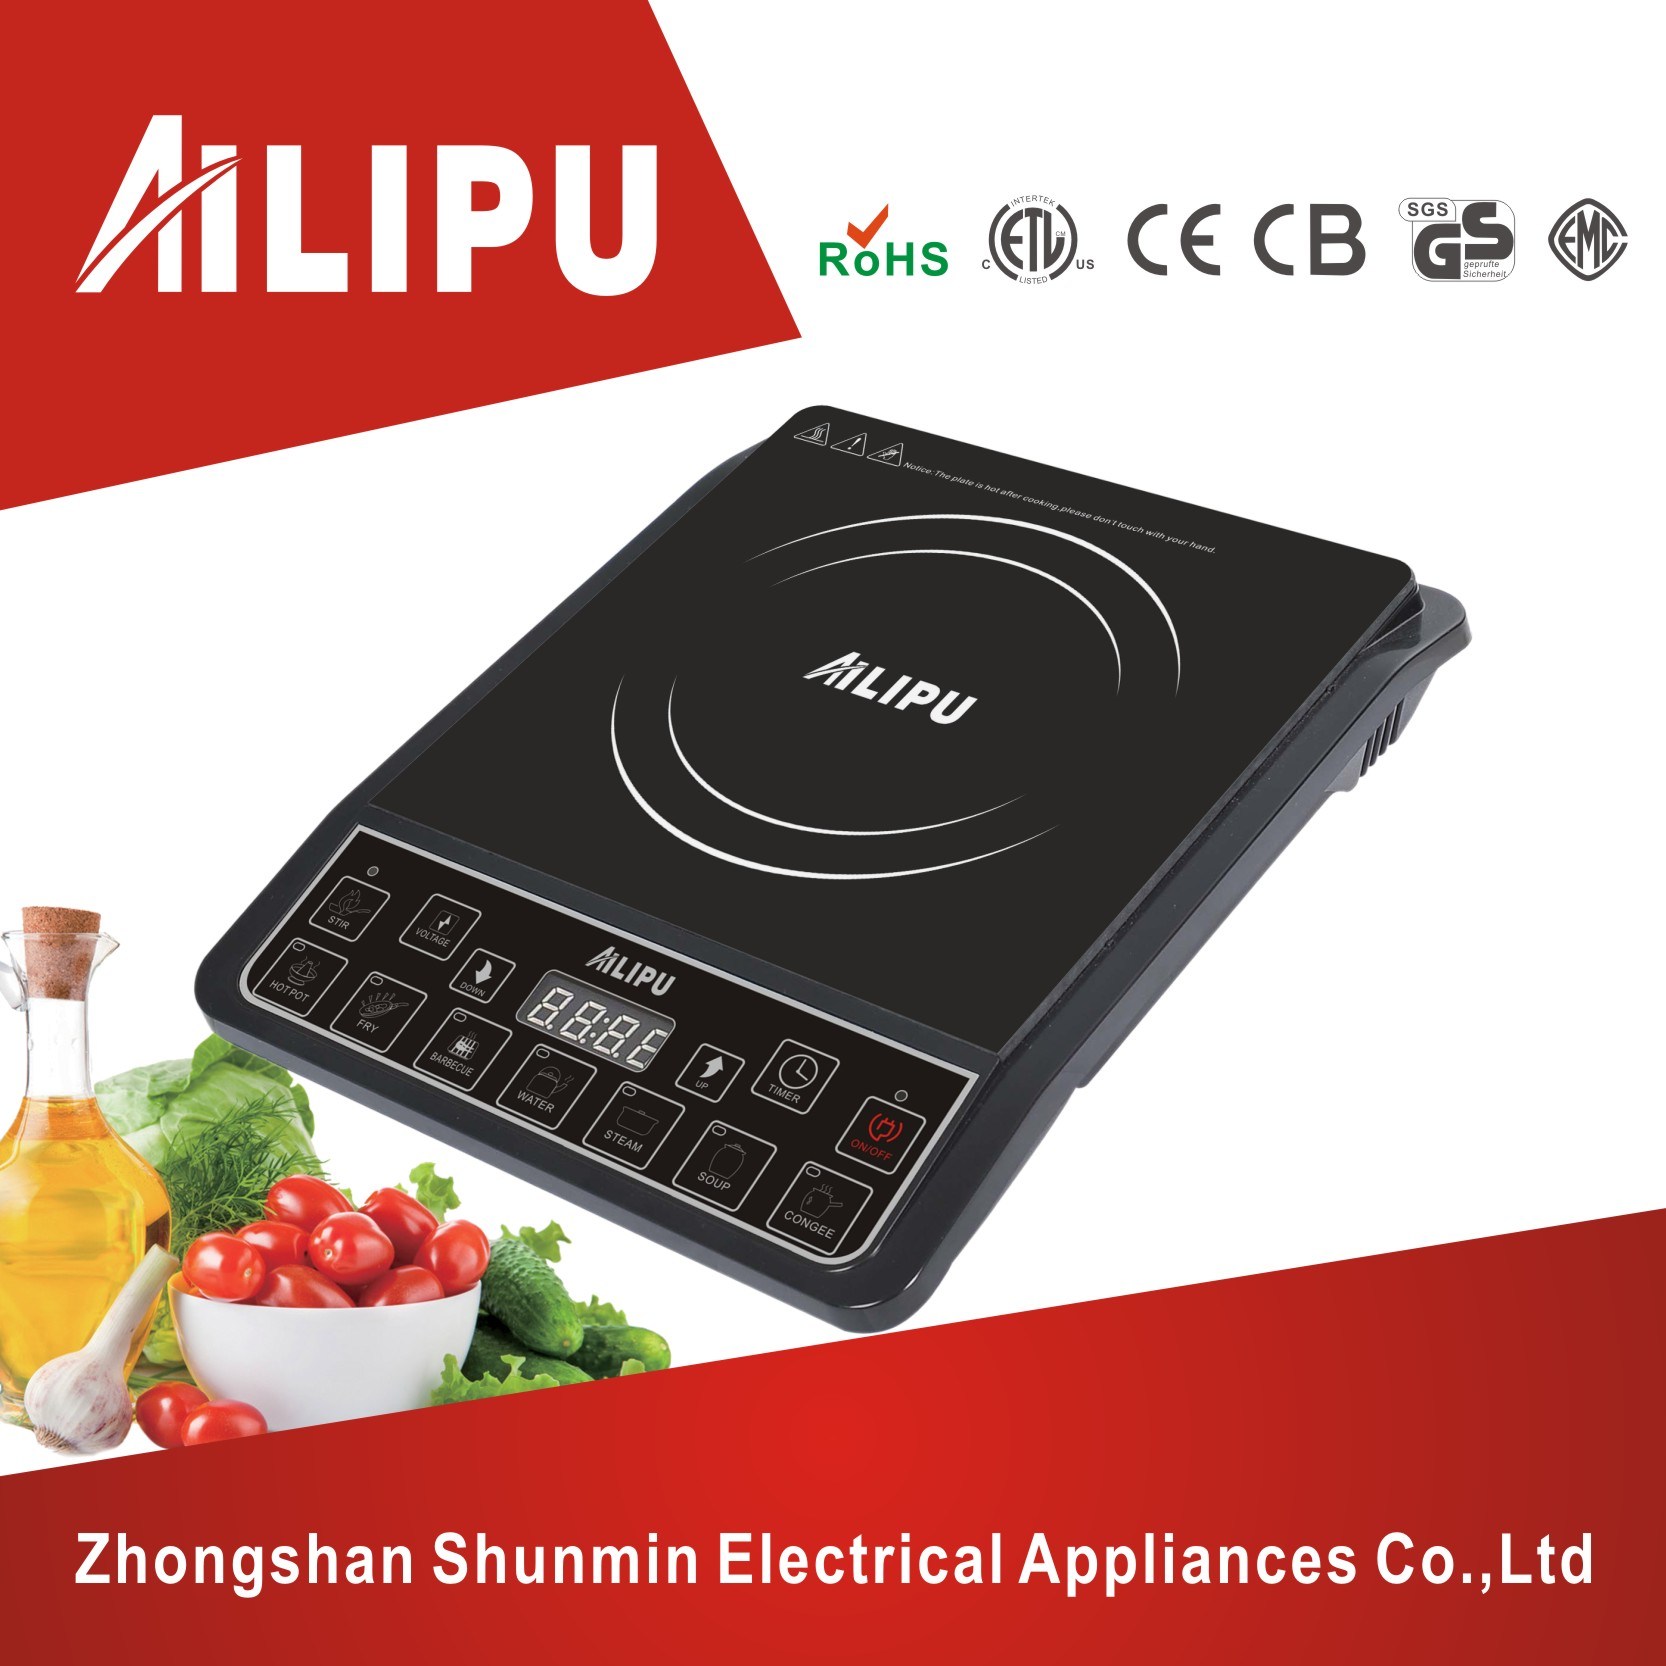 2016 Hot Selling Pushbutton Control National Induction Cooker 1.6kw